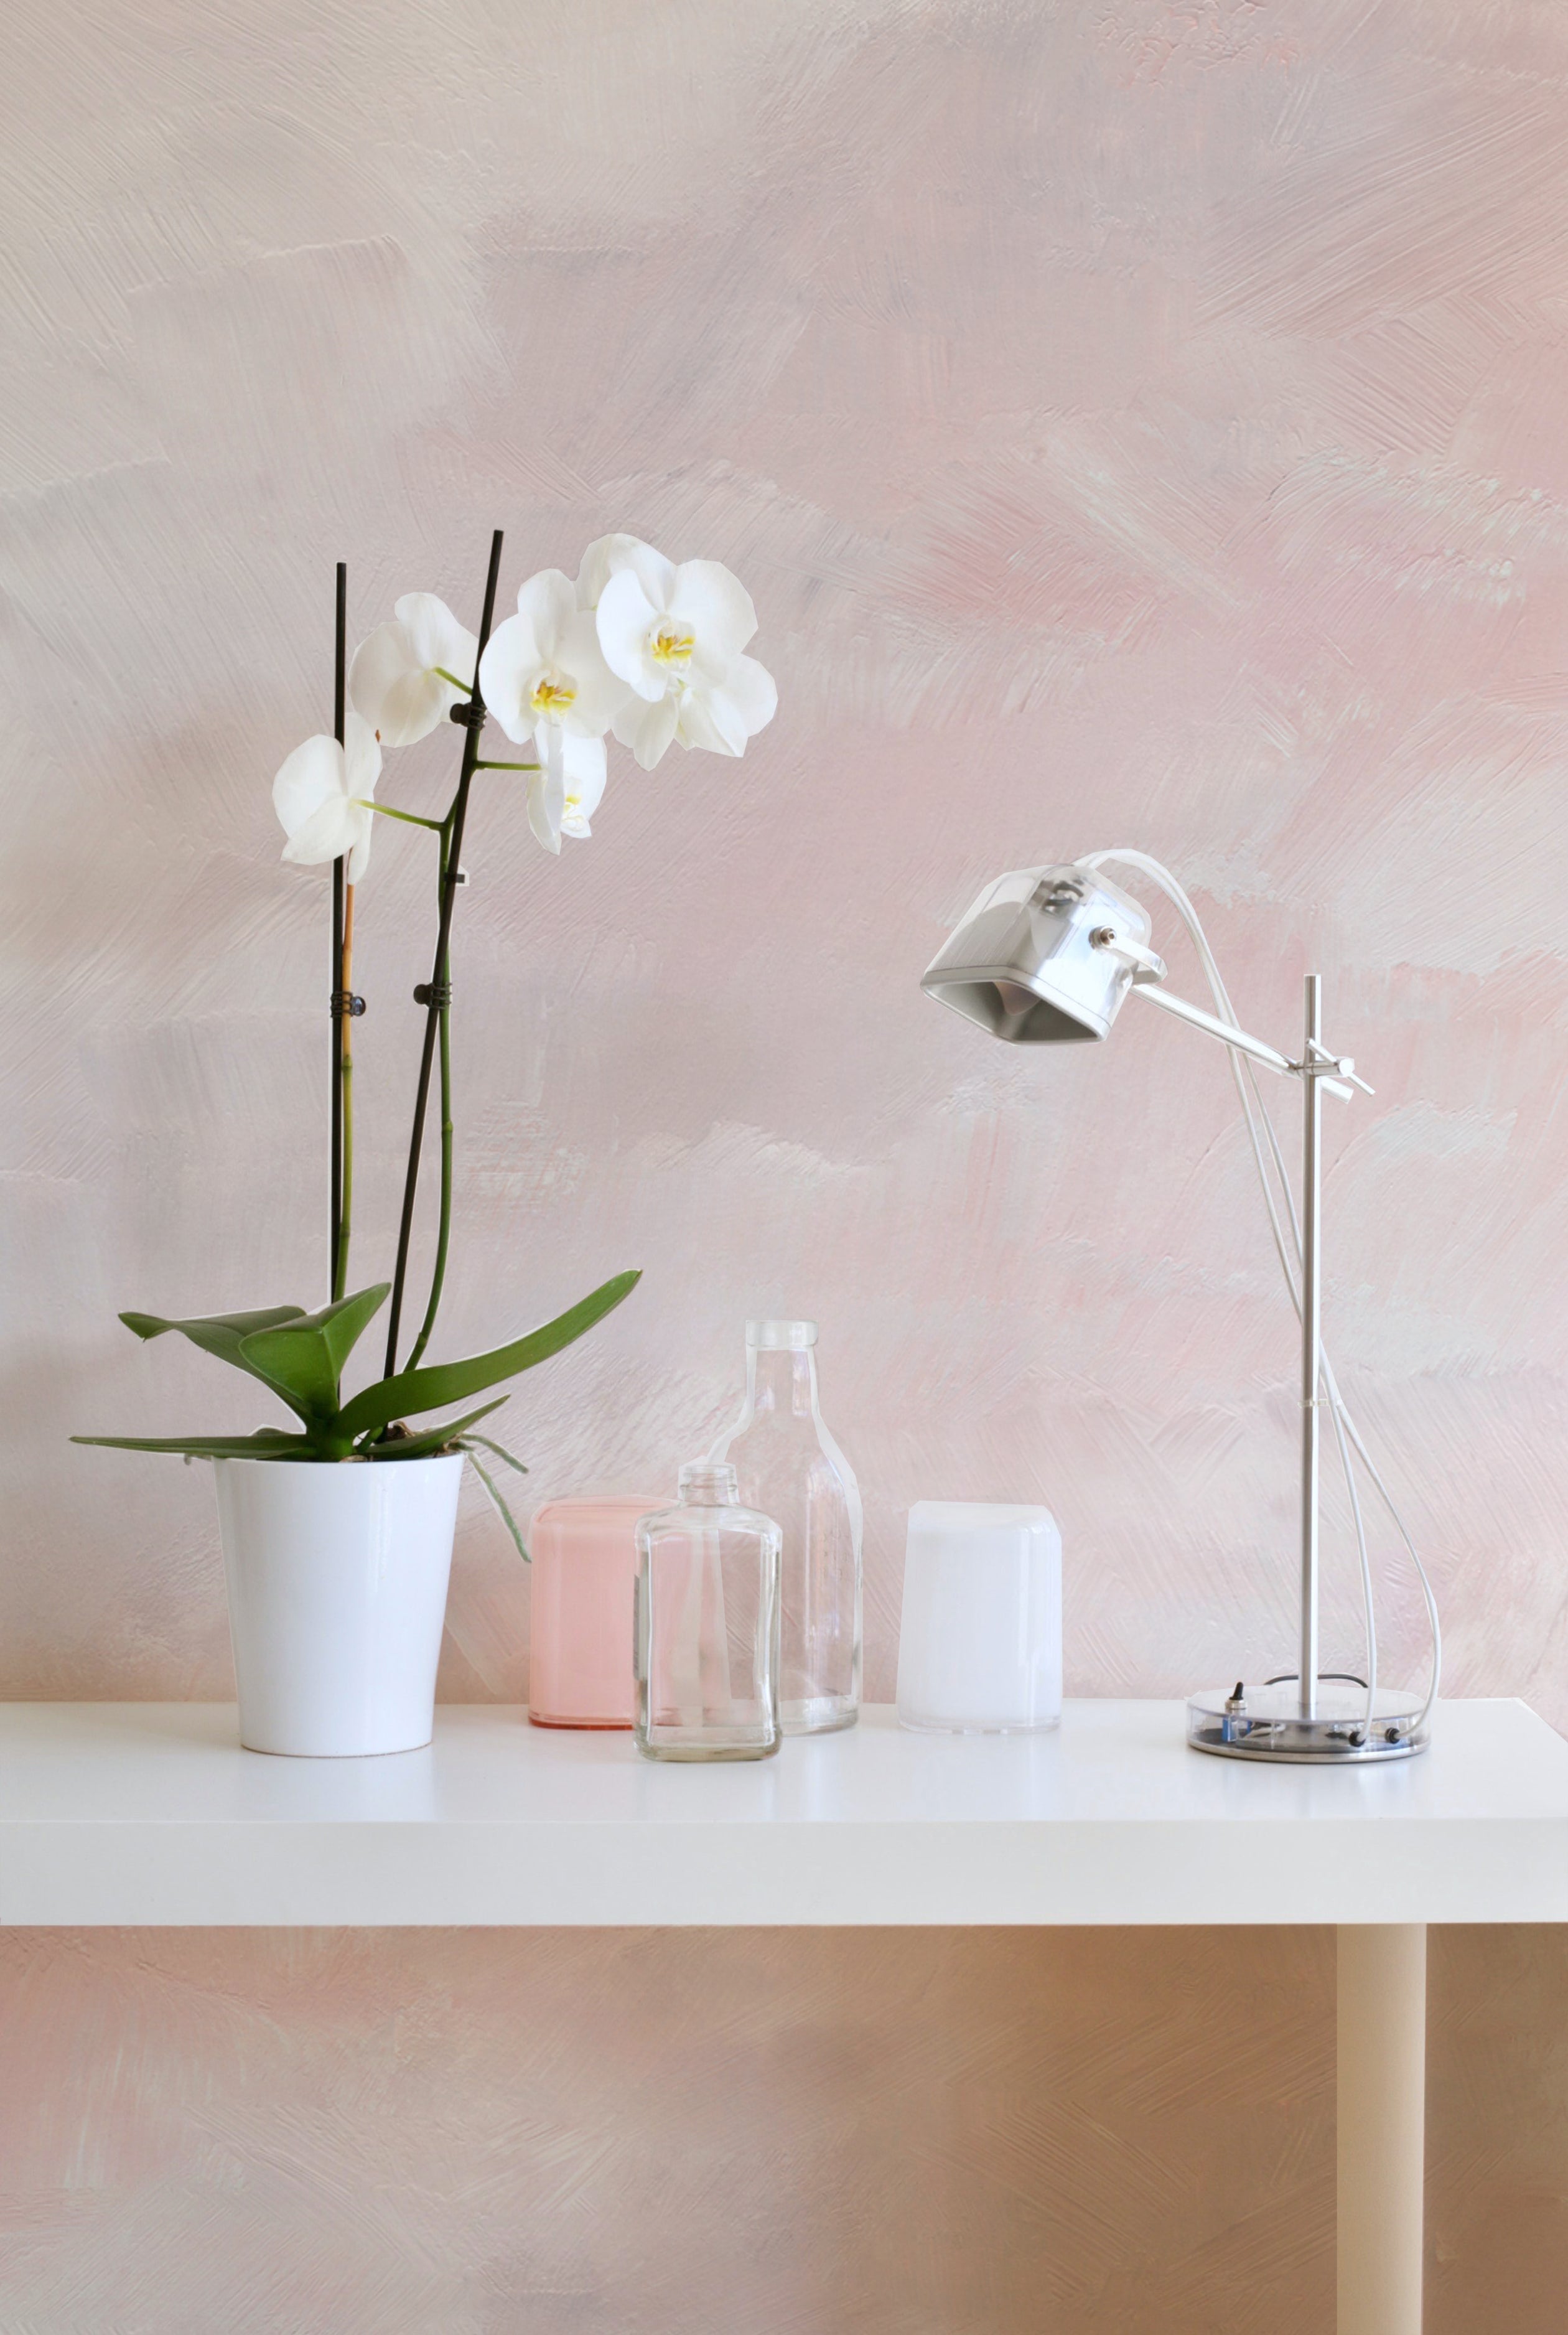 An elegant workspace accented by the Venetian Watercolor Wallpaper, providing a calming background for a white desk adorned with a potted orchid, a desk lamp, and minimalist decor.